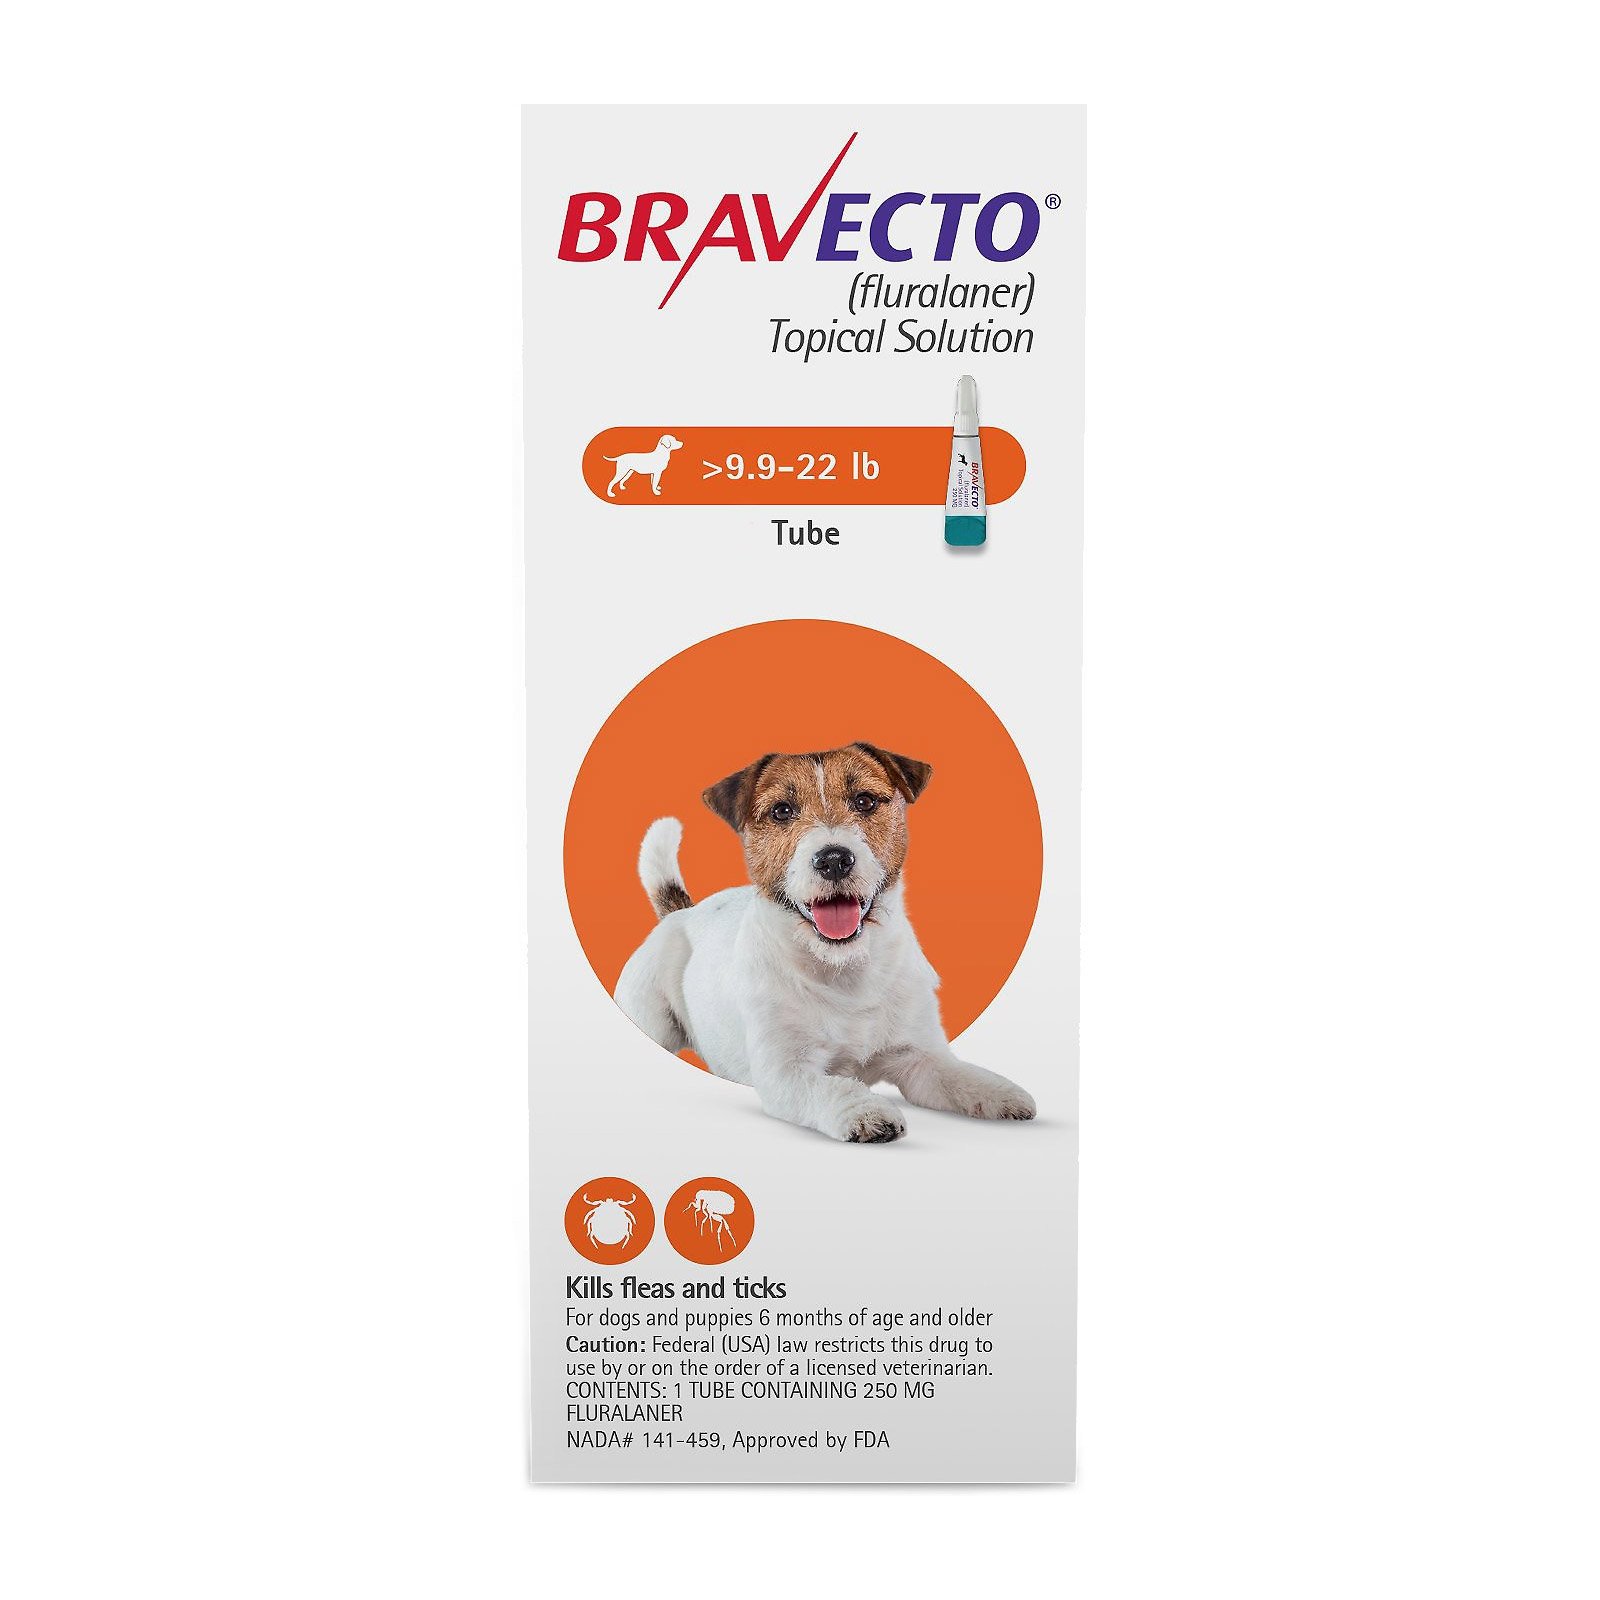 Bravecto-Topical-Solution-for-Dogs-9.9-22-lbs-2020.jpg